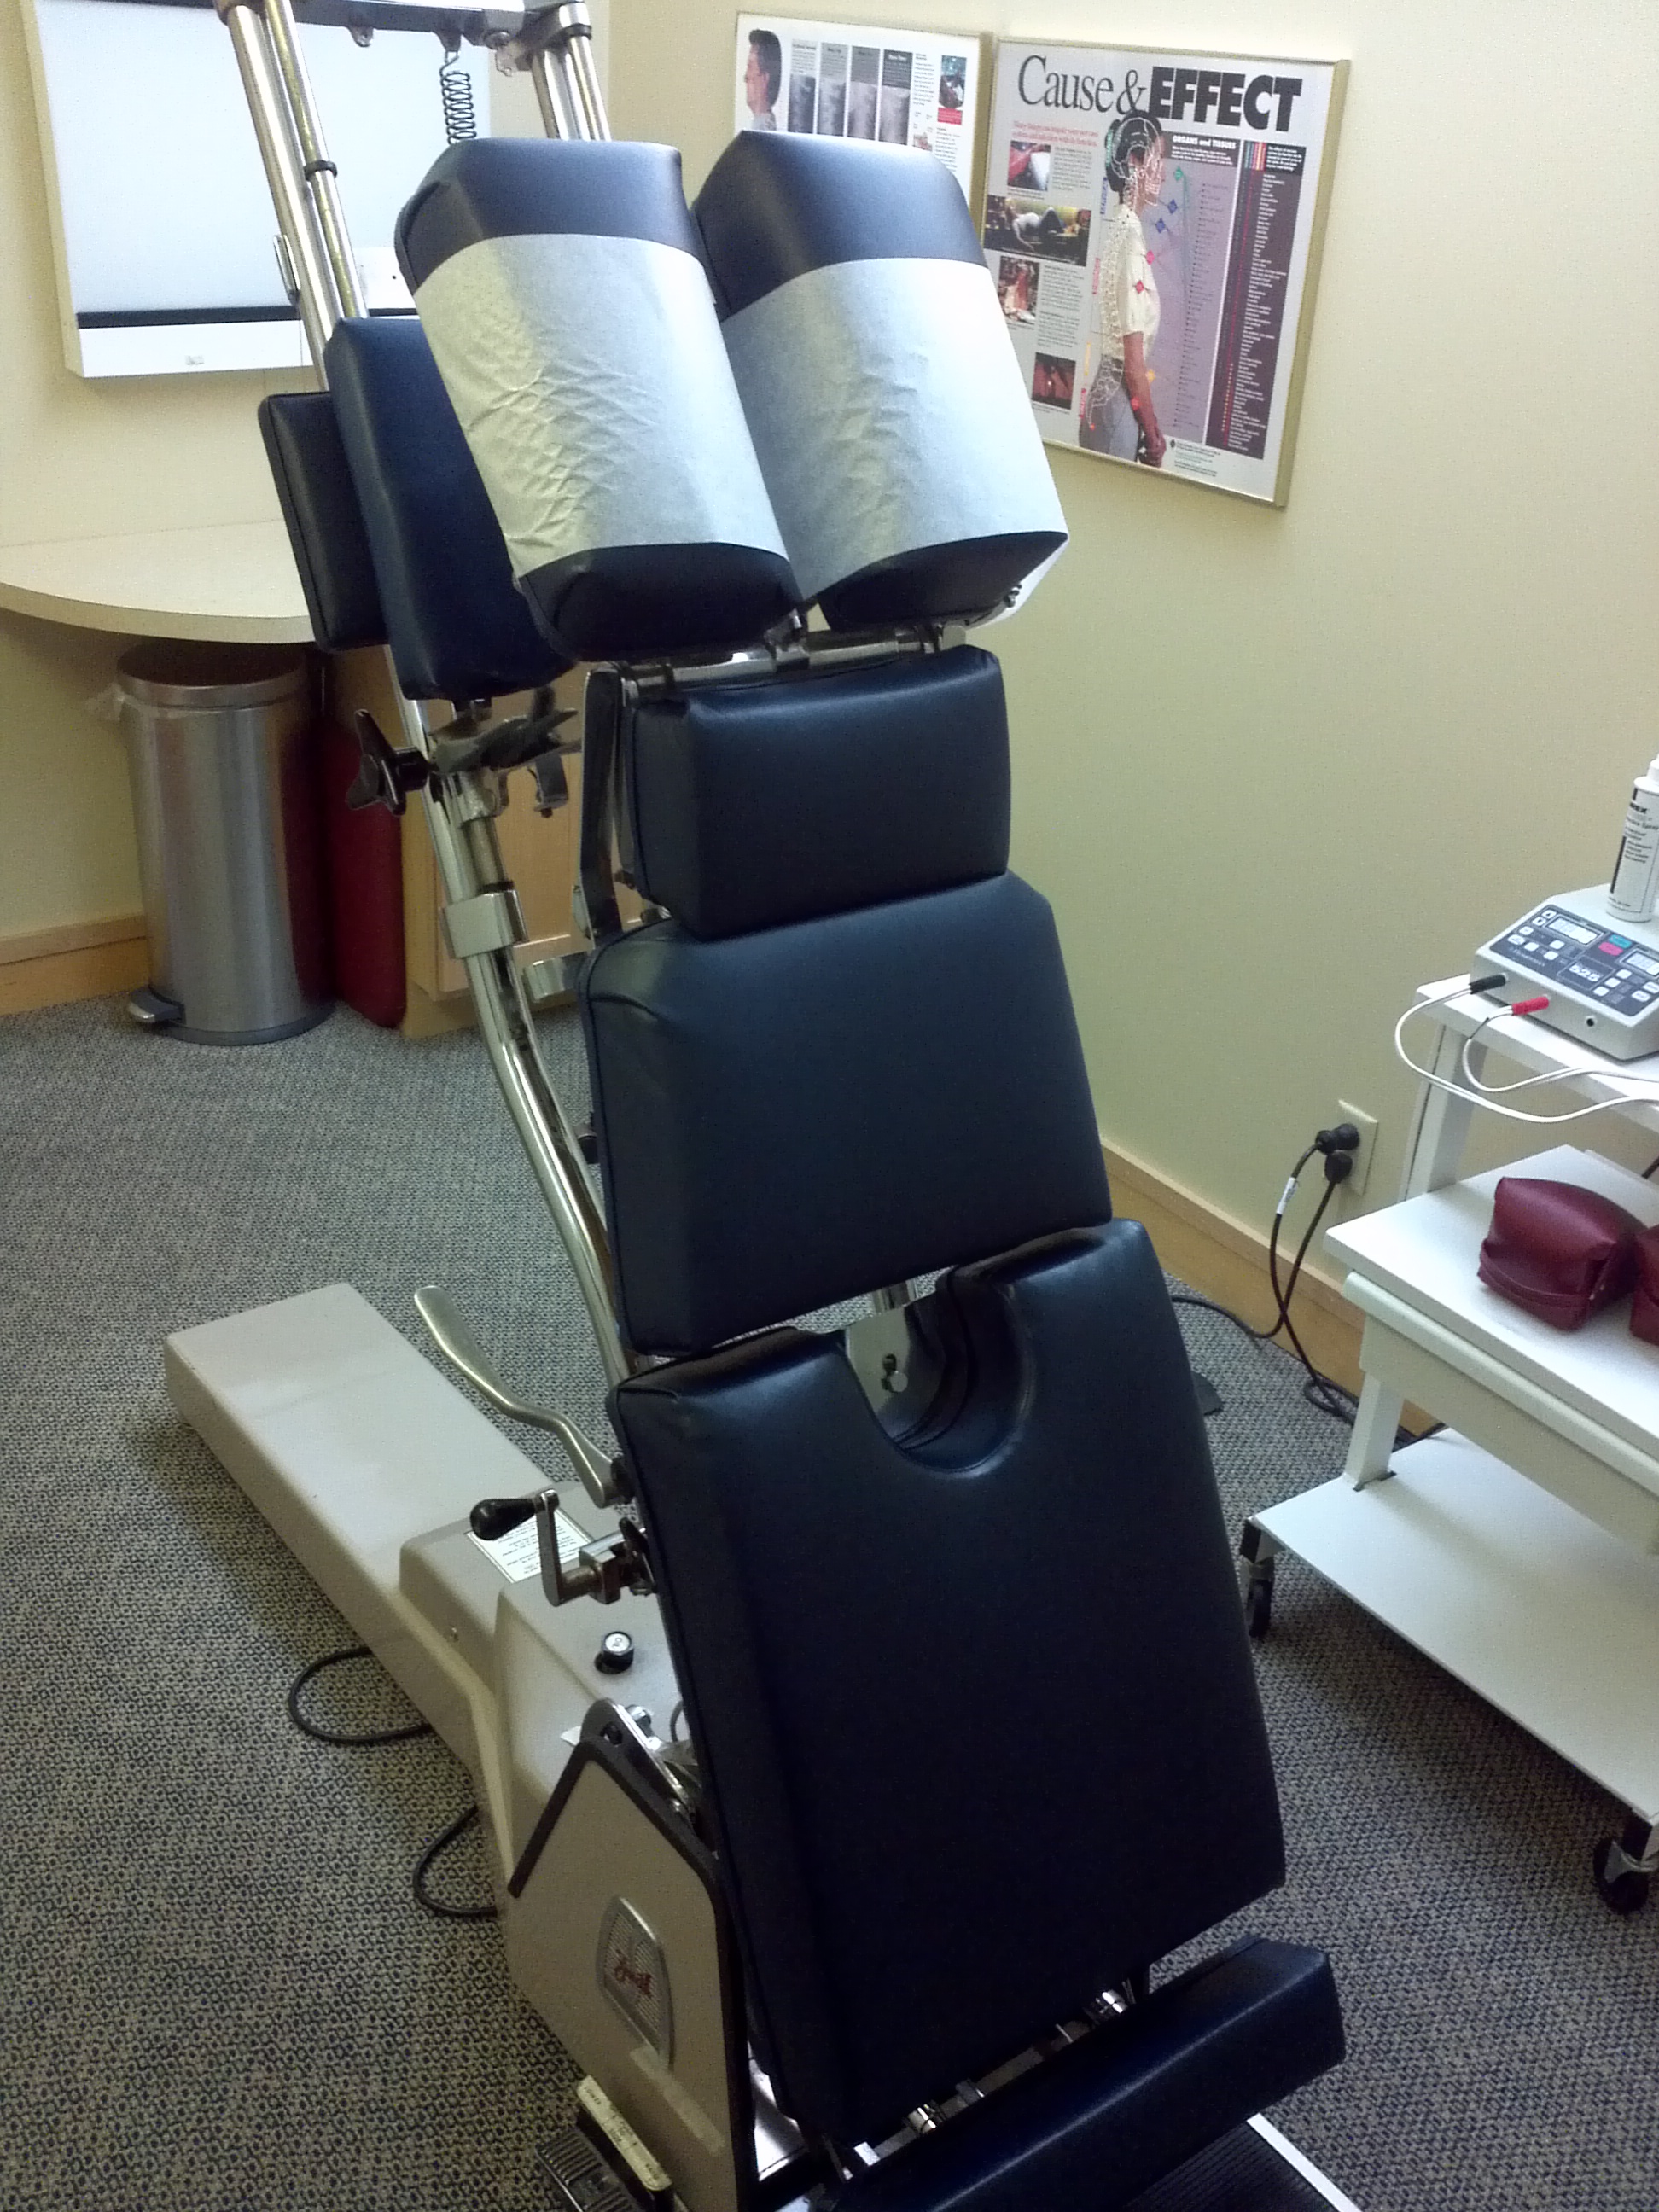 Chiropractic table Marty Chiropractic & Nutrition Excelsior (952)474-4121